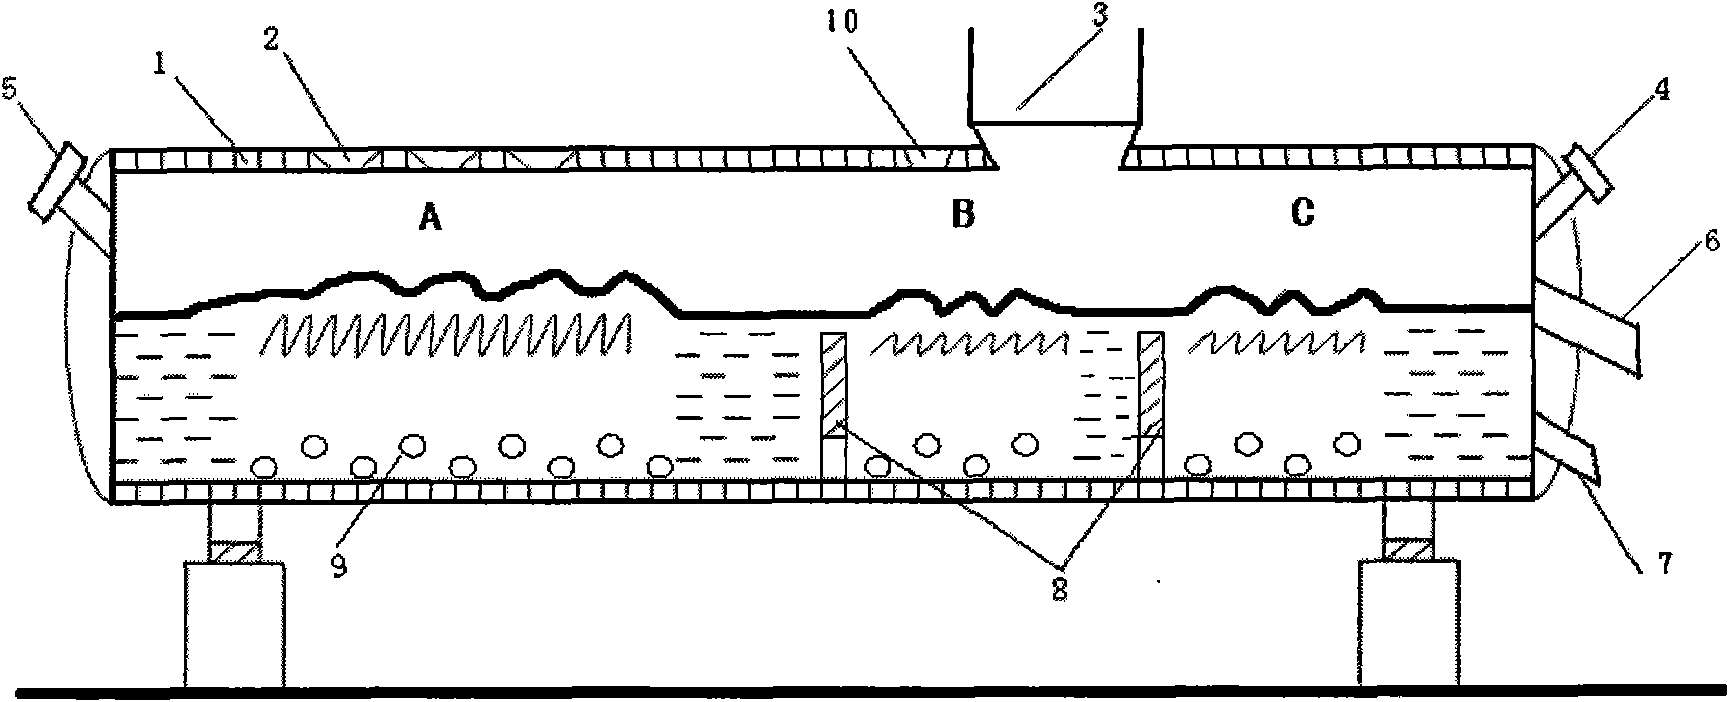 Copper smelting device and process